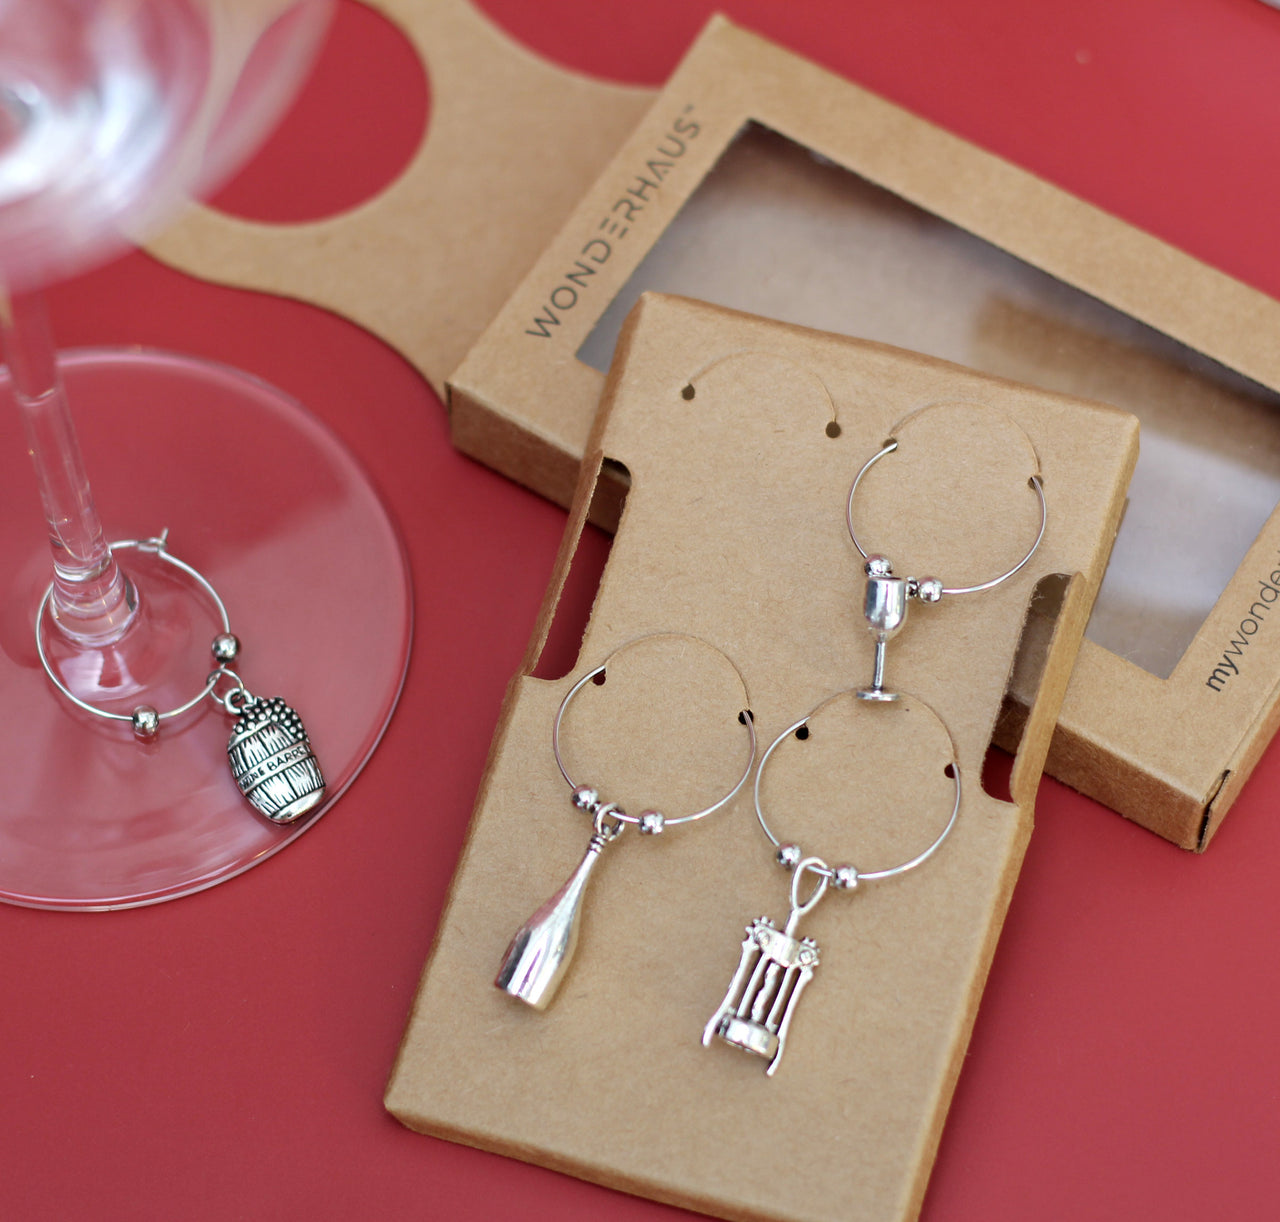 Wine Glass Tags in a gift box, set of 4